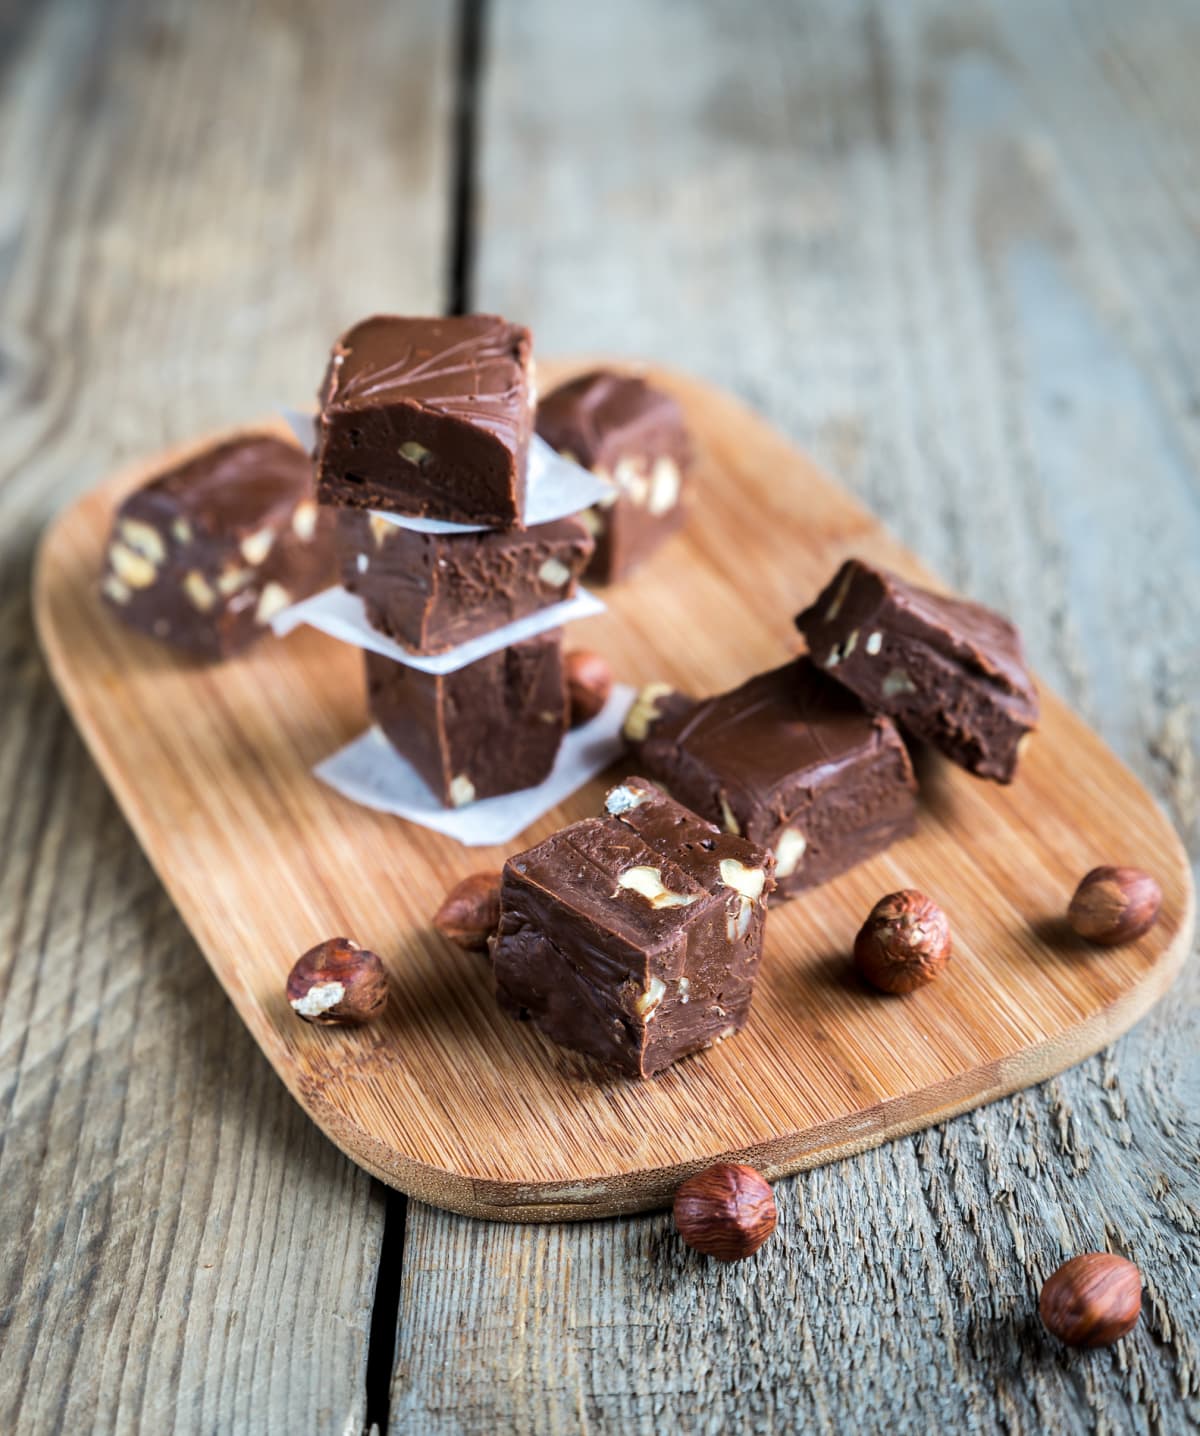 Fudge with hazelnuts on a wooden board